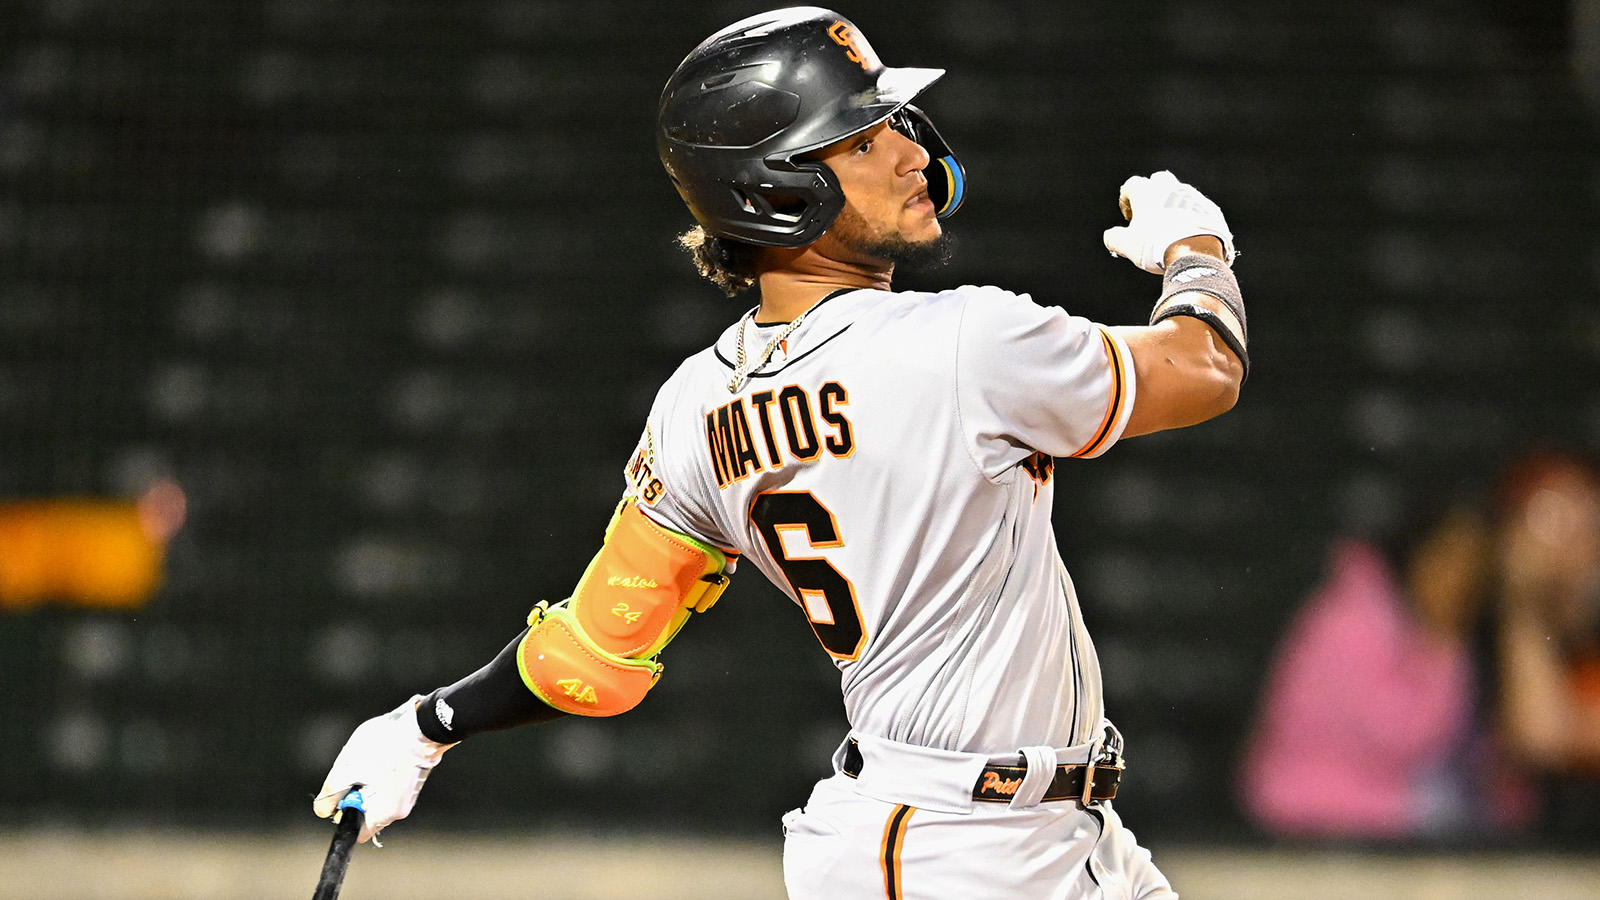 MLB Pipeline on X: Another day, another Marco Luciano homer. The